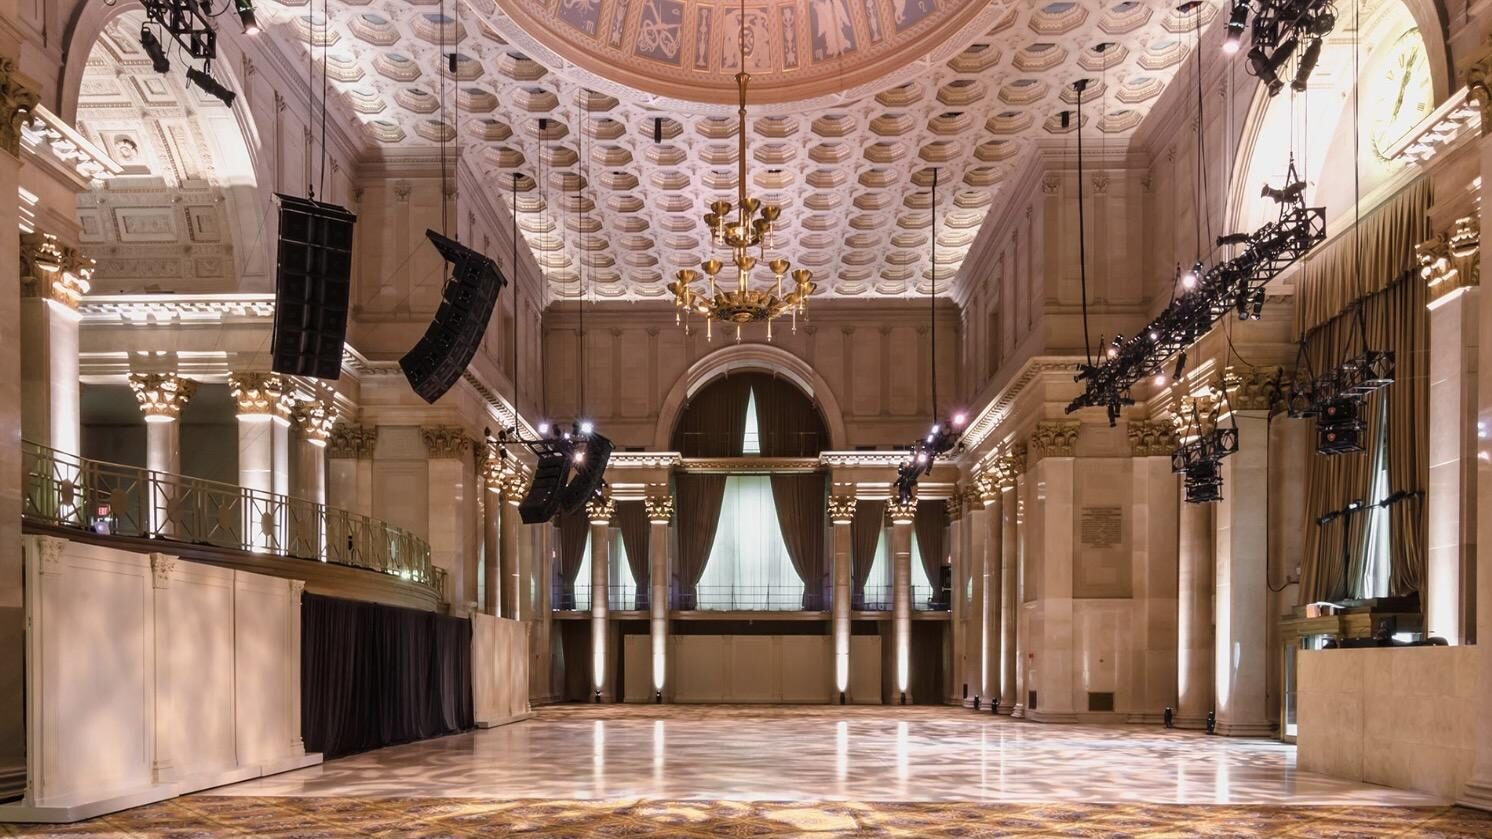 A large Ballroom with marble floors, a vaulted roof, and black blinds.